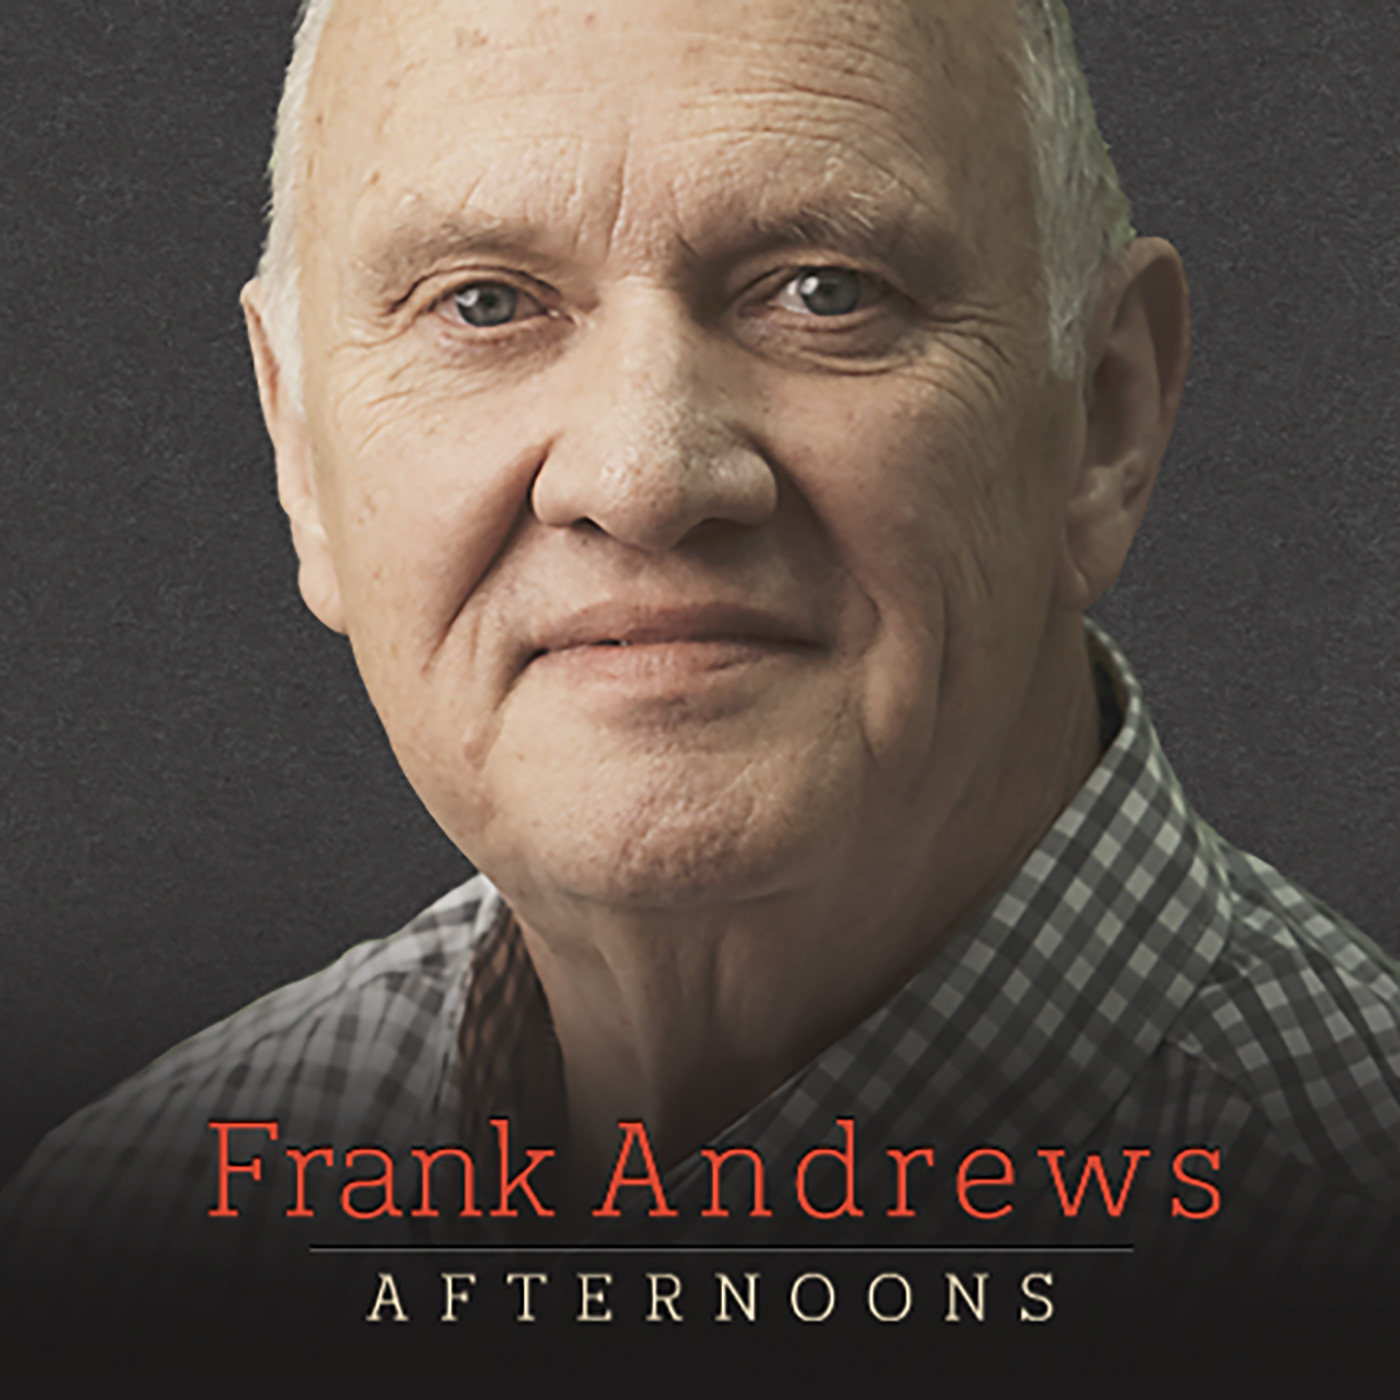 The Frank Andrews Show